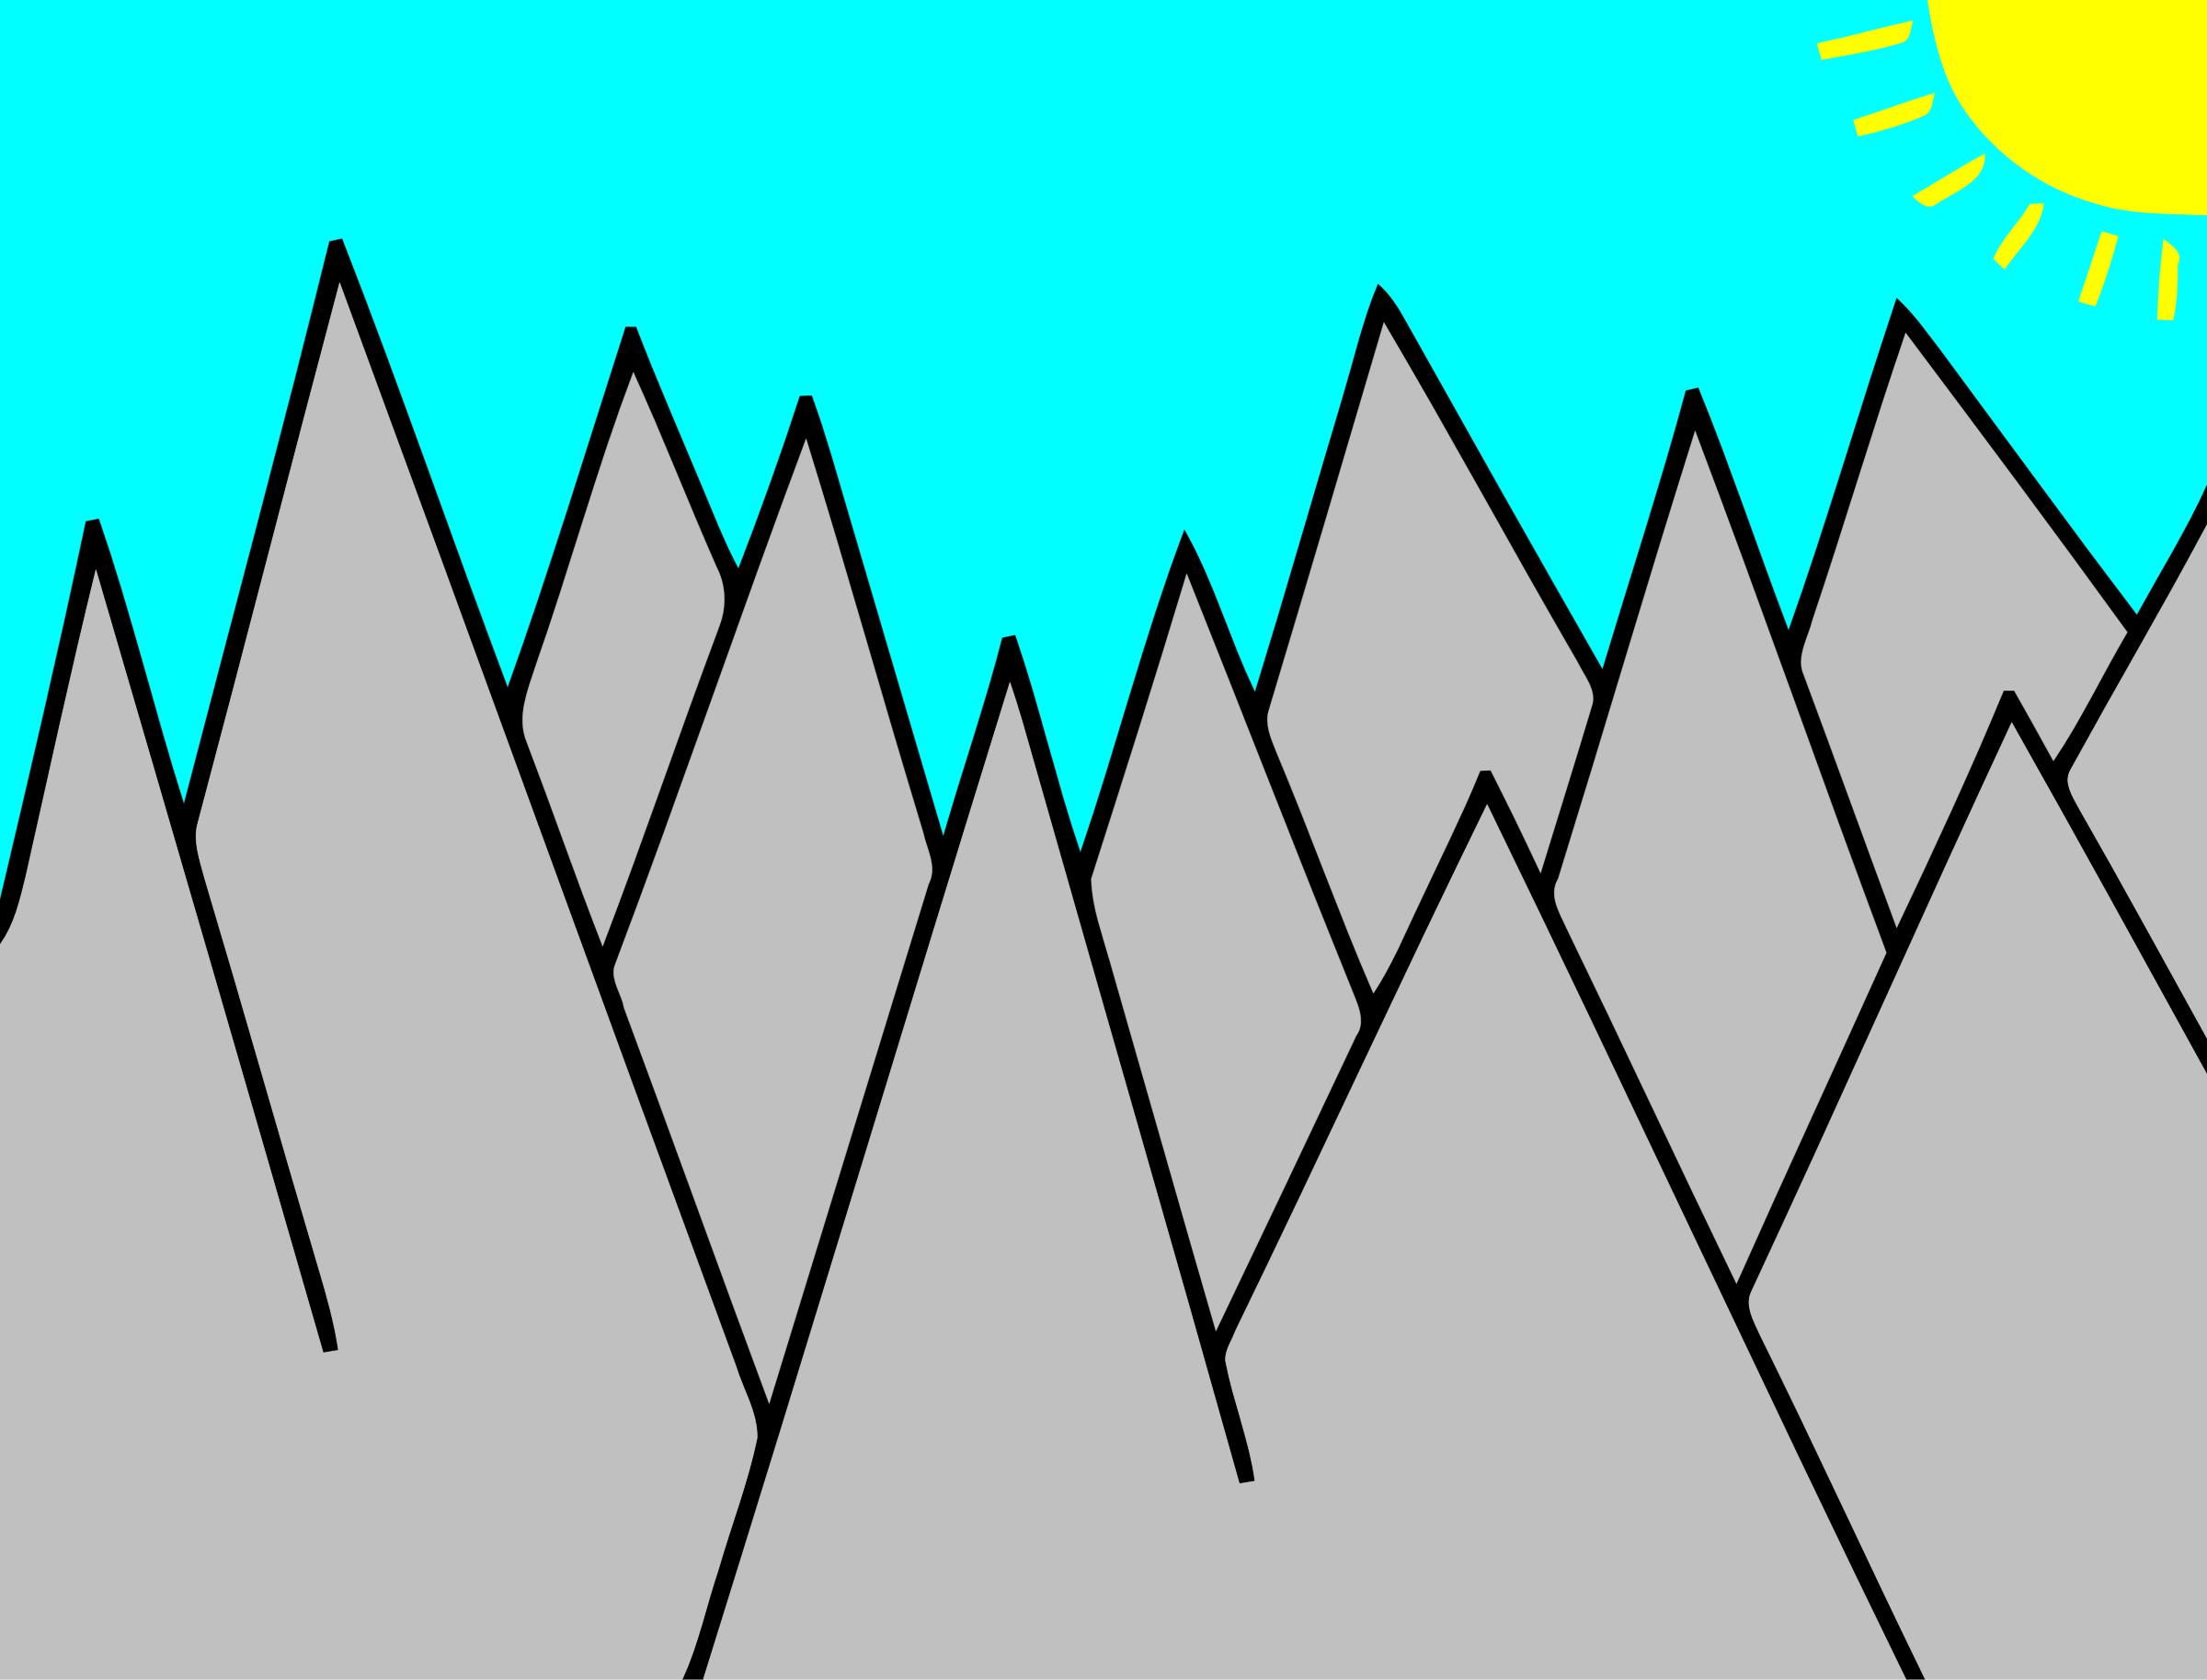 Mountains png